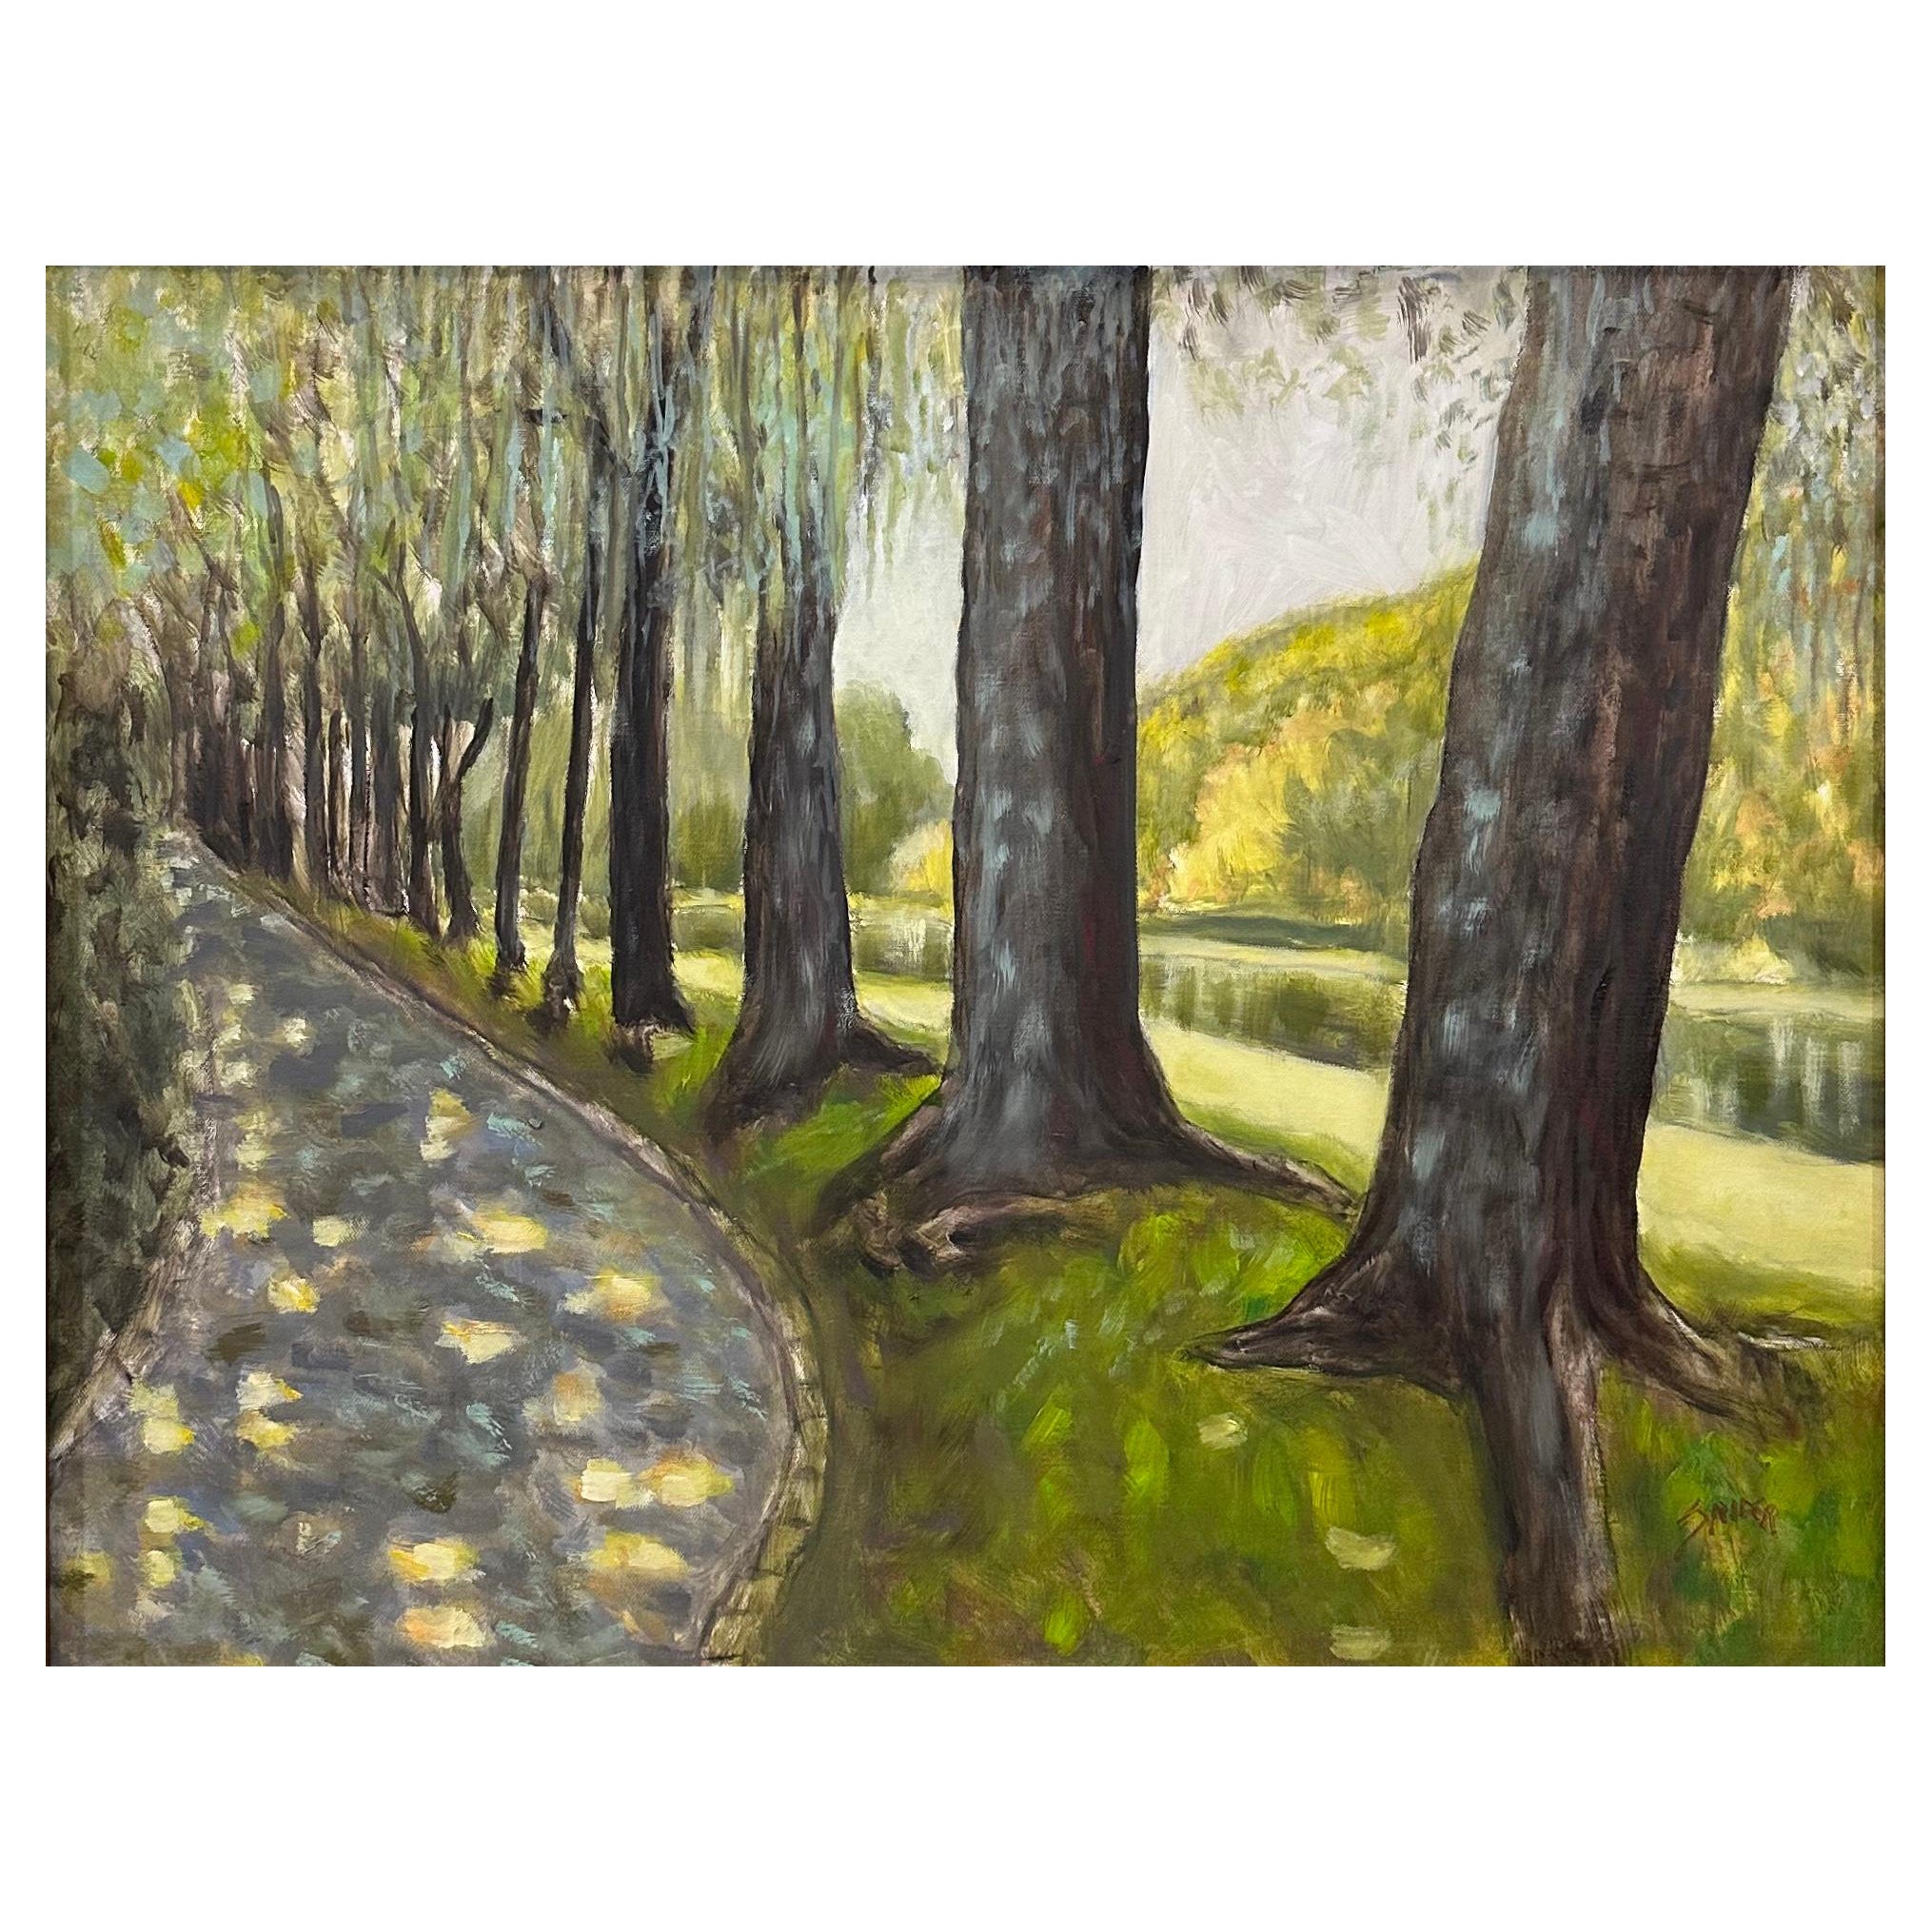 Oil on Canvas Painting "Oaks Along the River" by Lawrence Snider